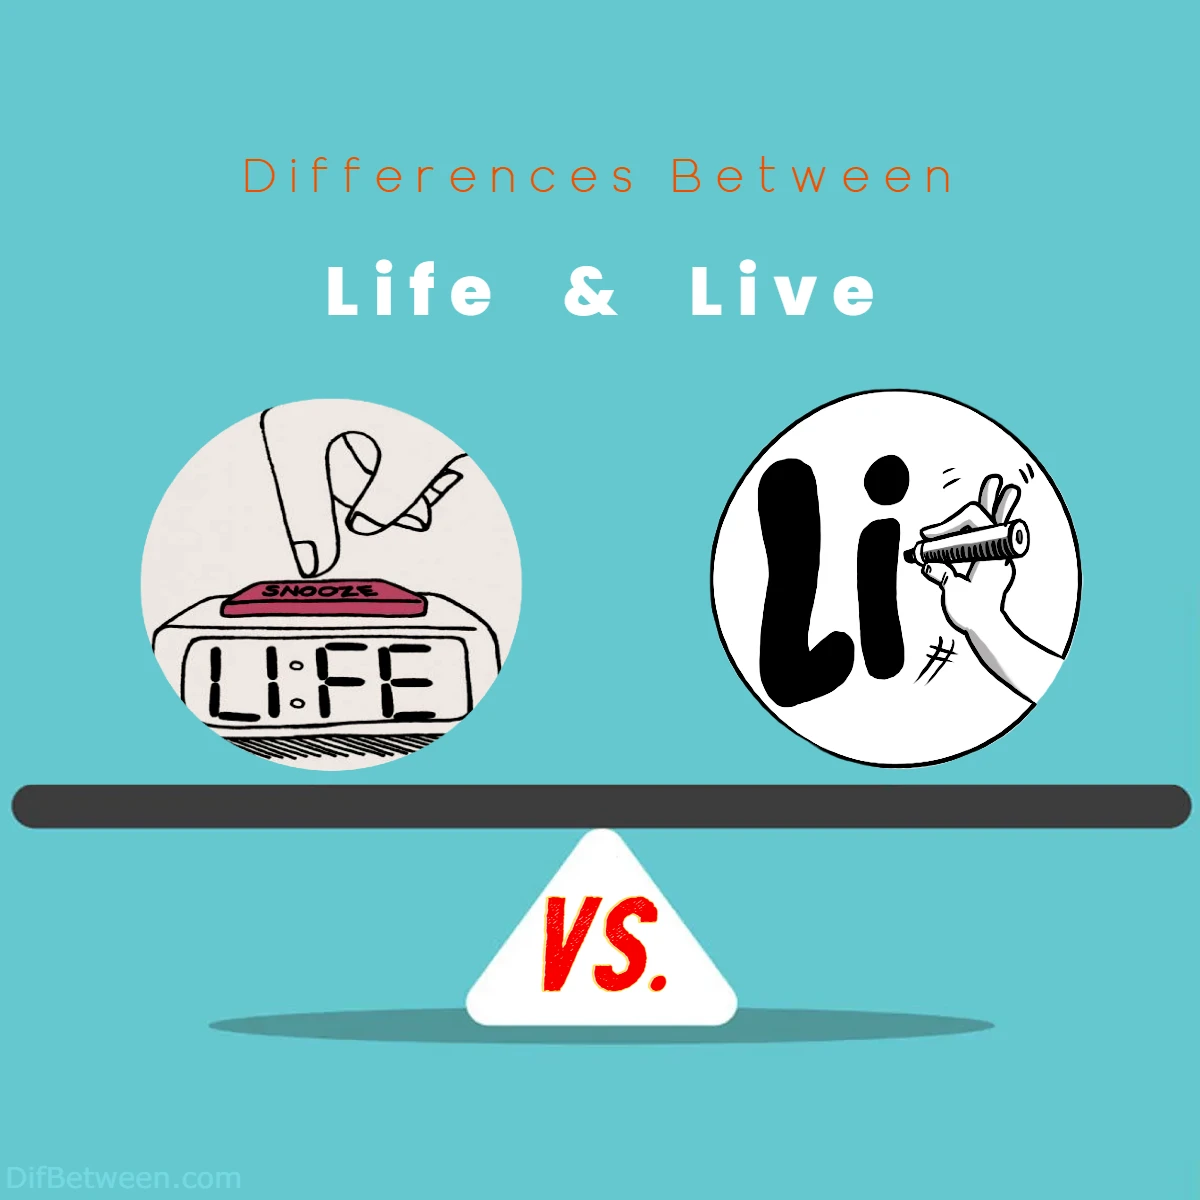 Differences Between Life vs Live